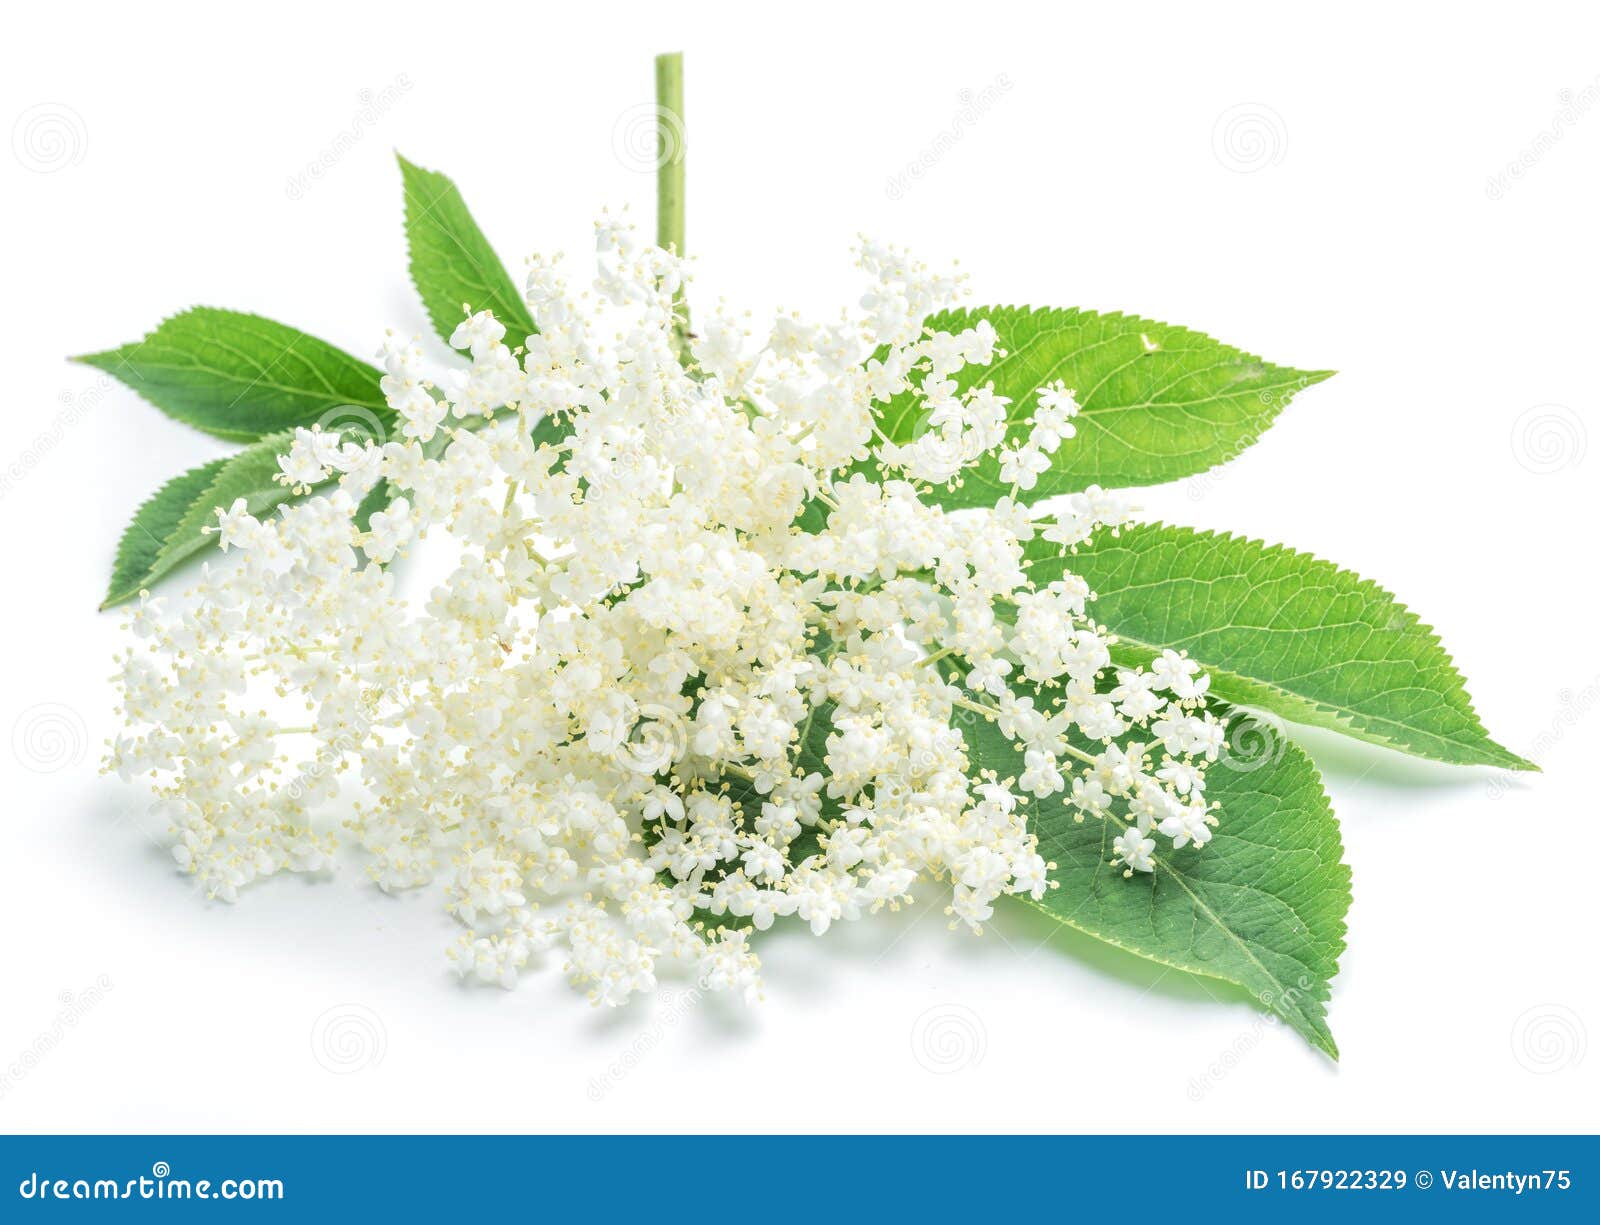 Elderberry Flowers on the White Background Stock Image - Image of ...